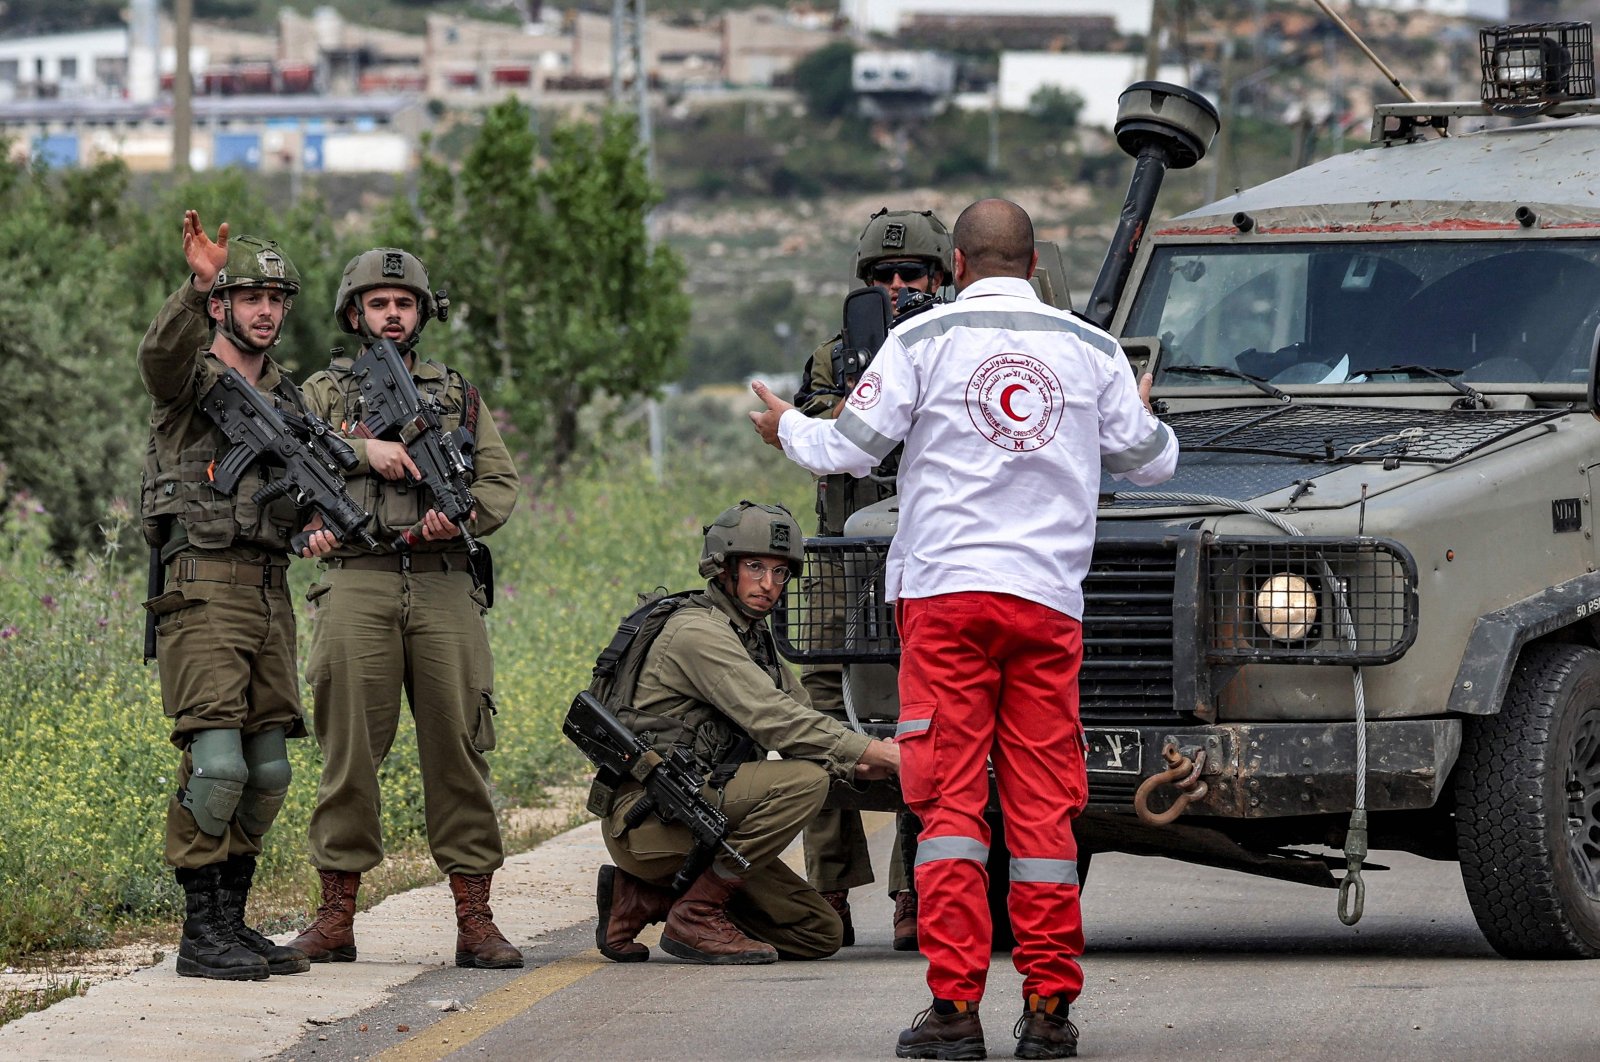 A Palestinian ambulance first responder speaks with Israeli soldiers blocking a road at a location where 2 Palestinians were killed during an Israeli army operation, Nablus, occupied West Bank, April 11, 2023. (AFP Photo)